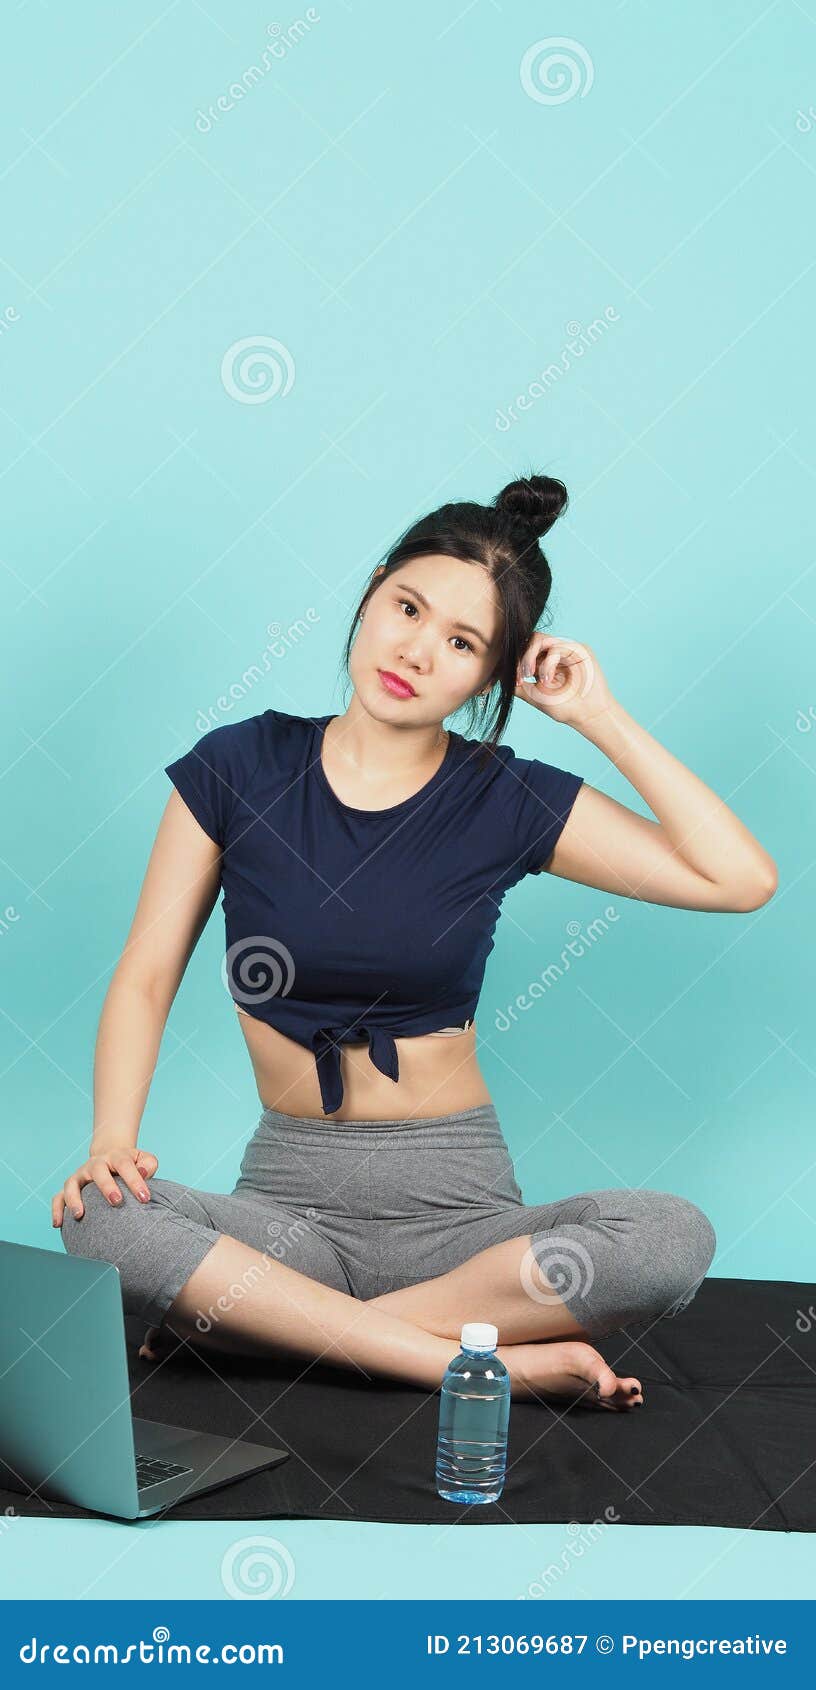 Female fitness influencer doing sit-ups in a white outdoor studio